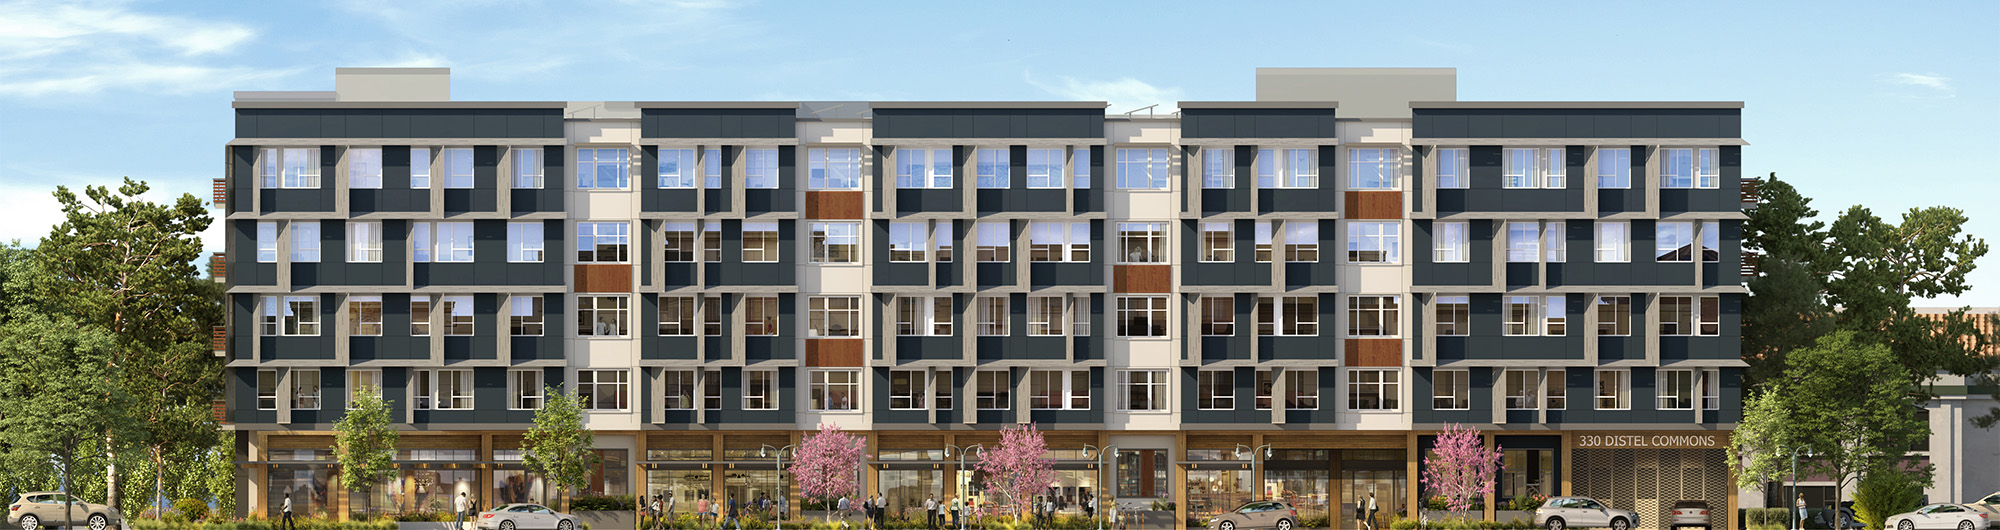 Multifamily development rendering with front view of building